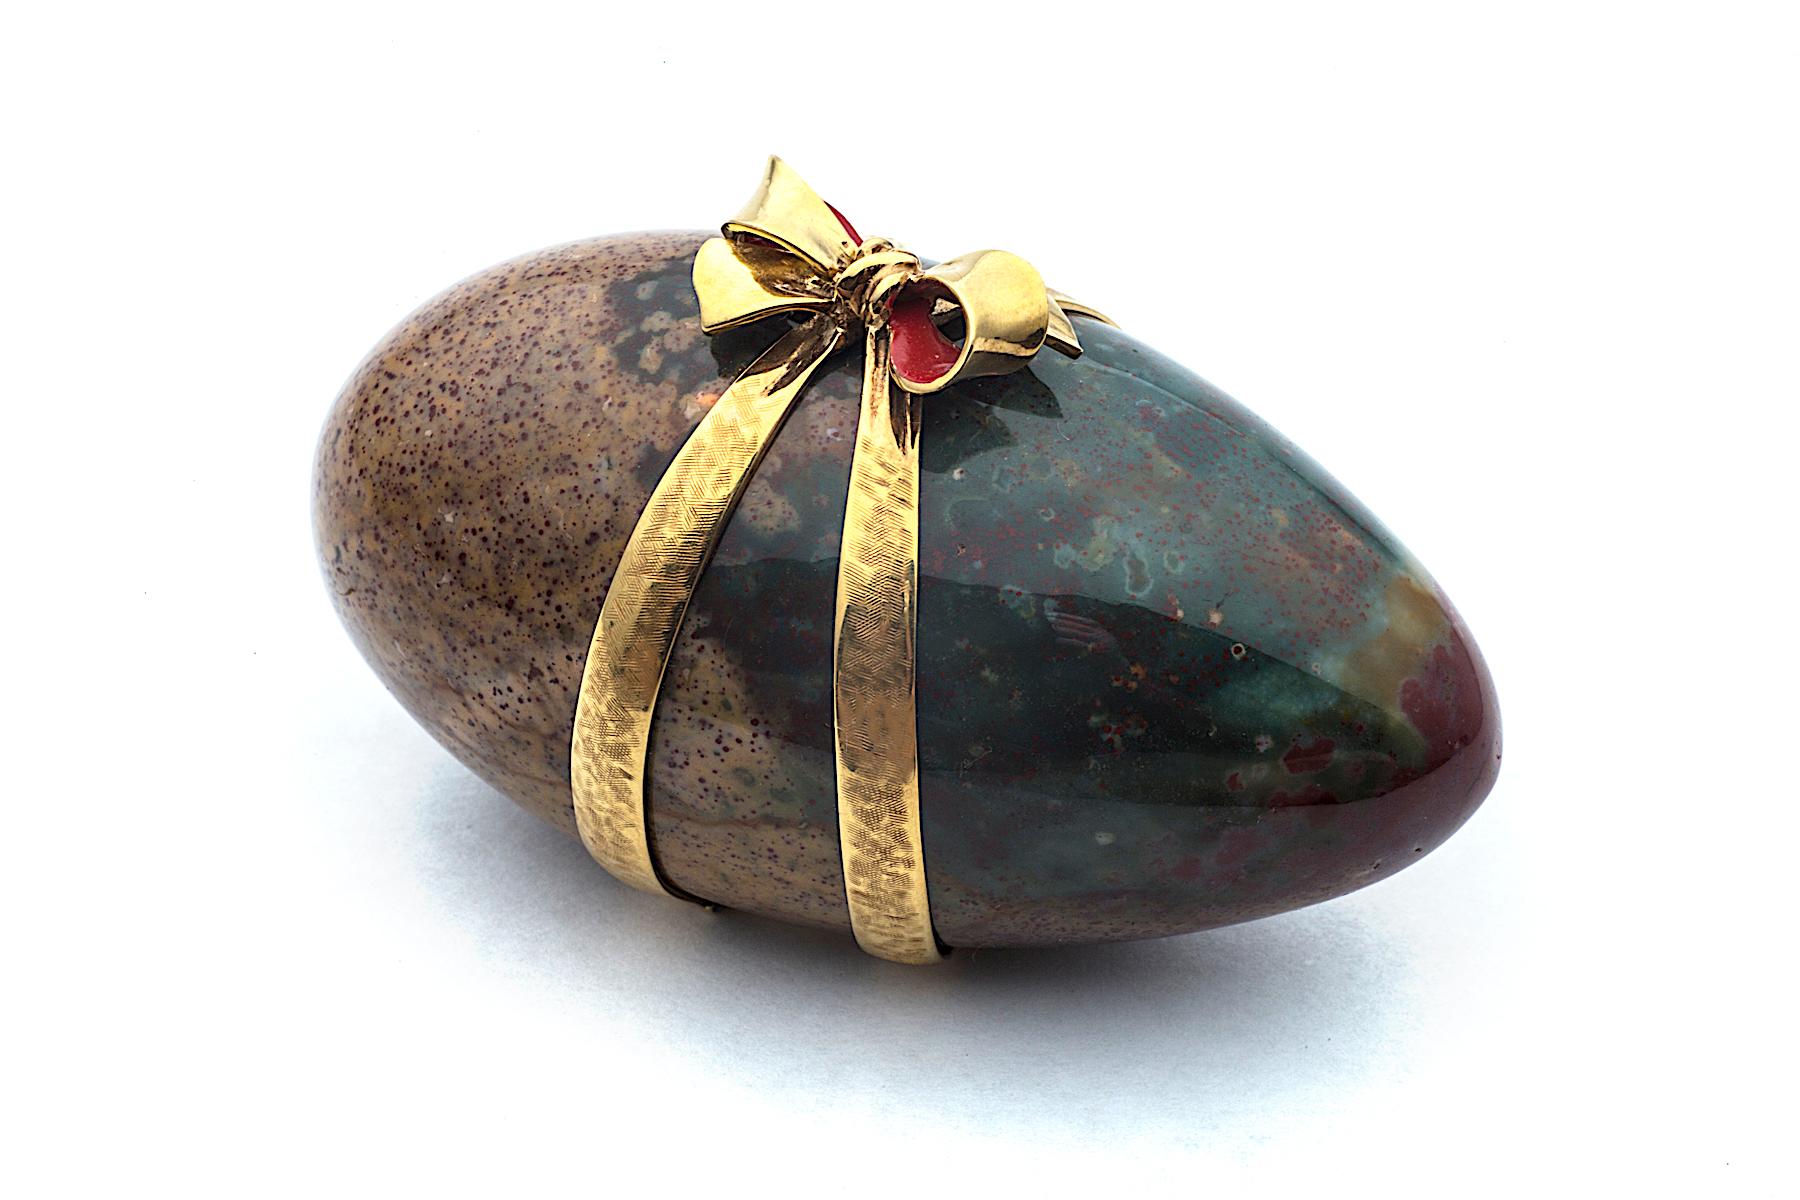 Contemporary Vintage Verdura Agate Gold Ribbon Wrapped Egg Paperweight